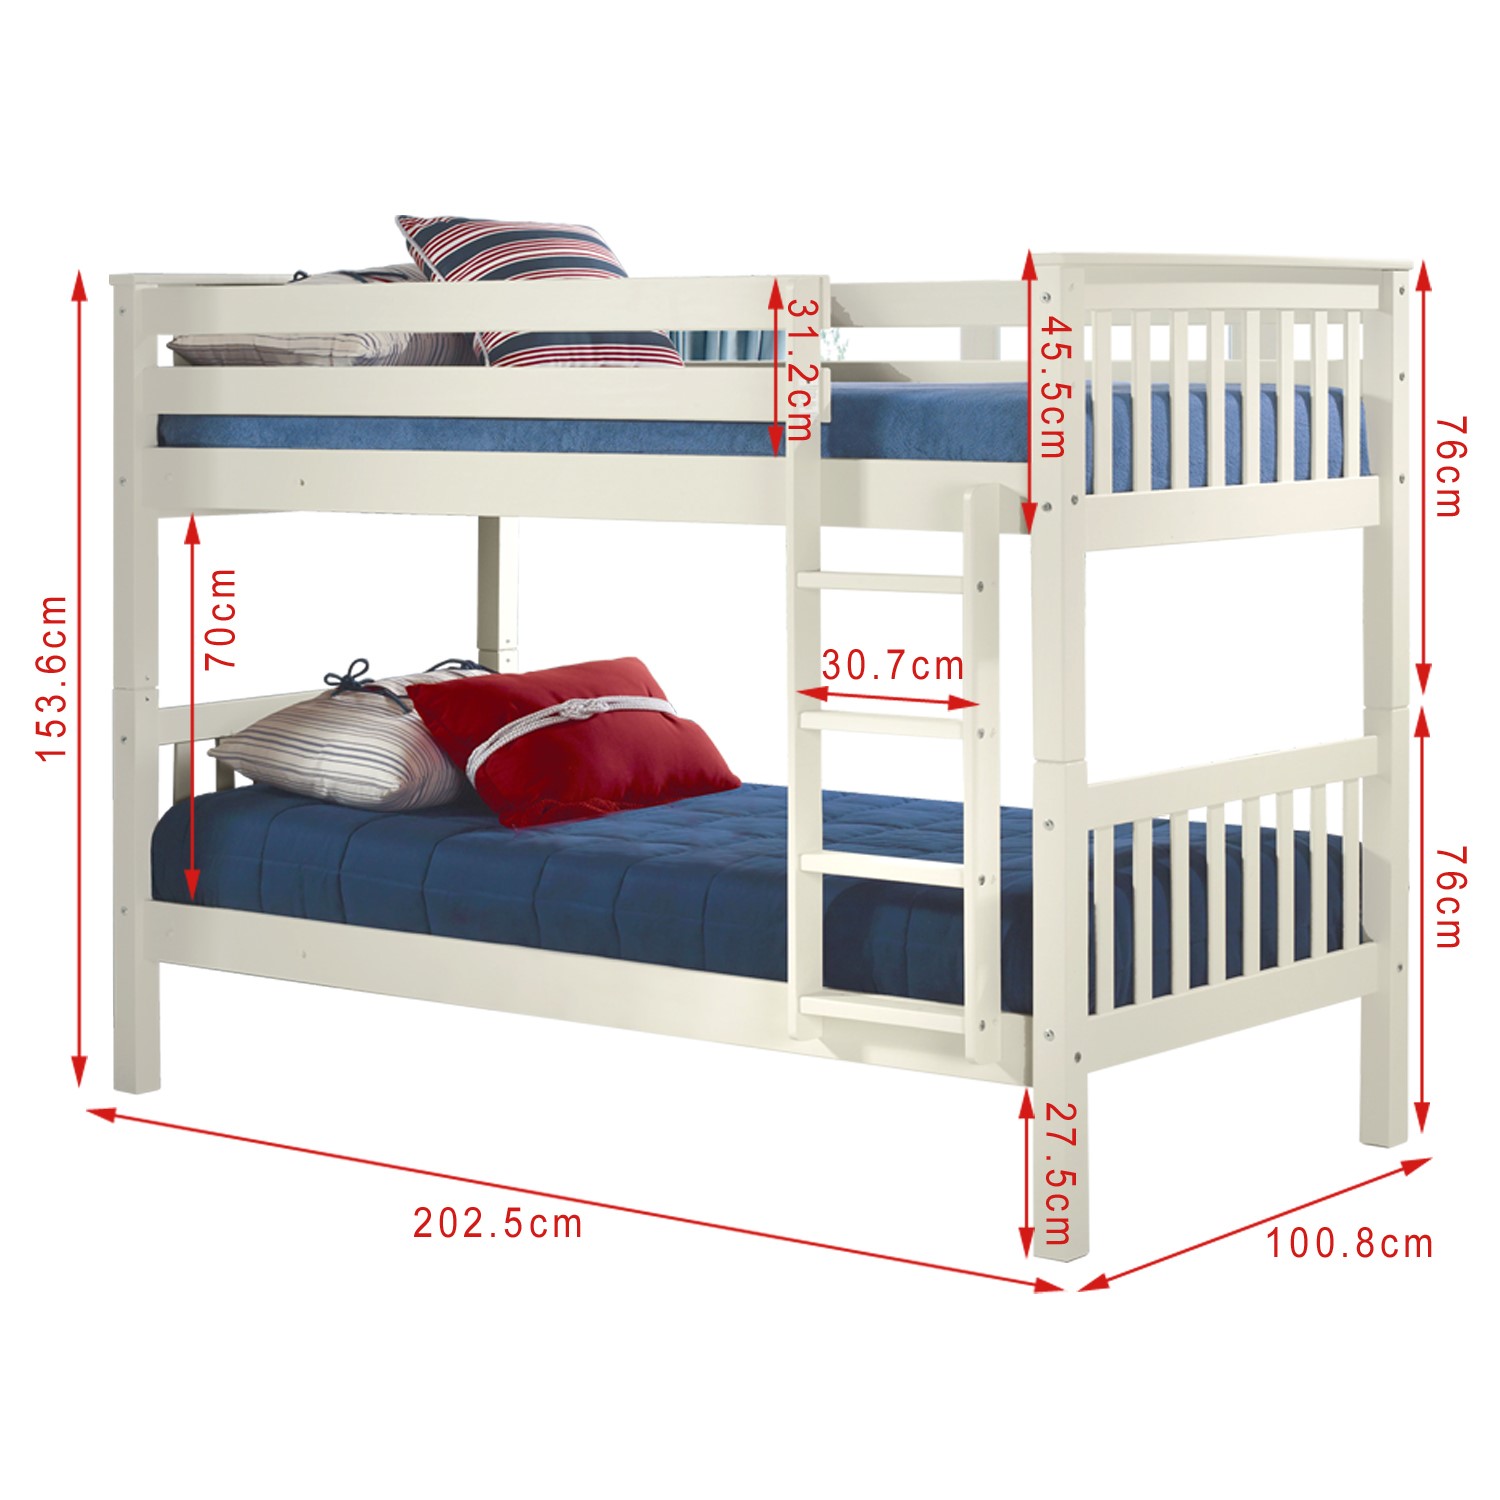 Oxford Single Bunk Bed In White, Bunk Bed Measurements Height